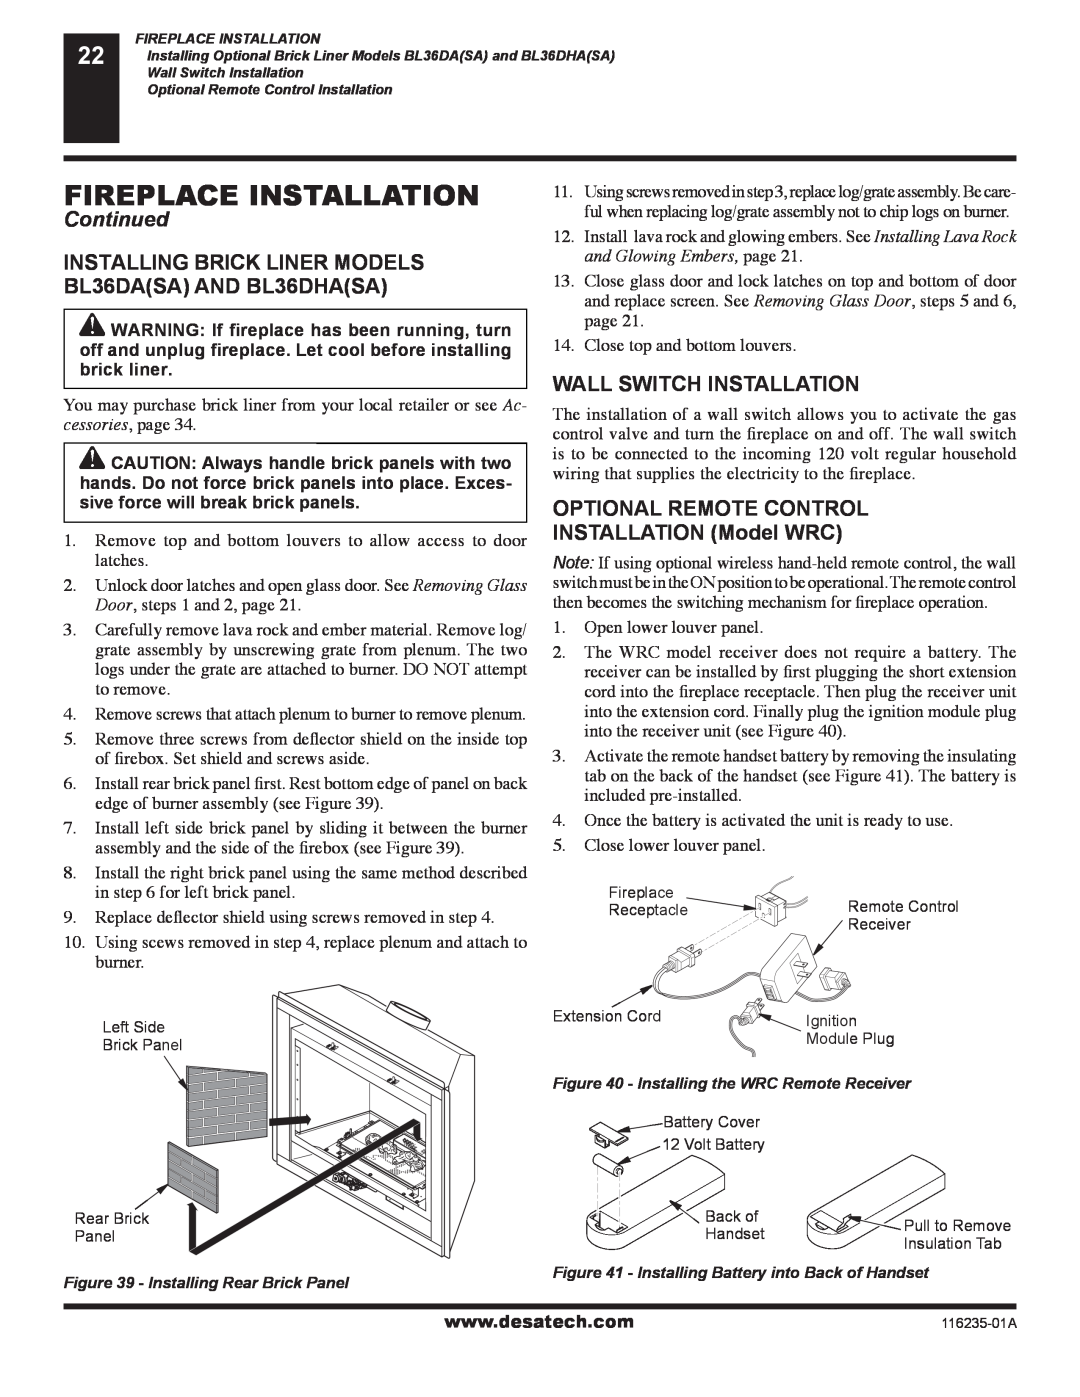 Desa (V)VC36NE Series installation manual Fireplace Installation, Continued, Wall Switch Installation 